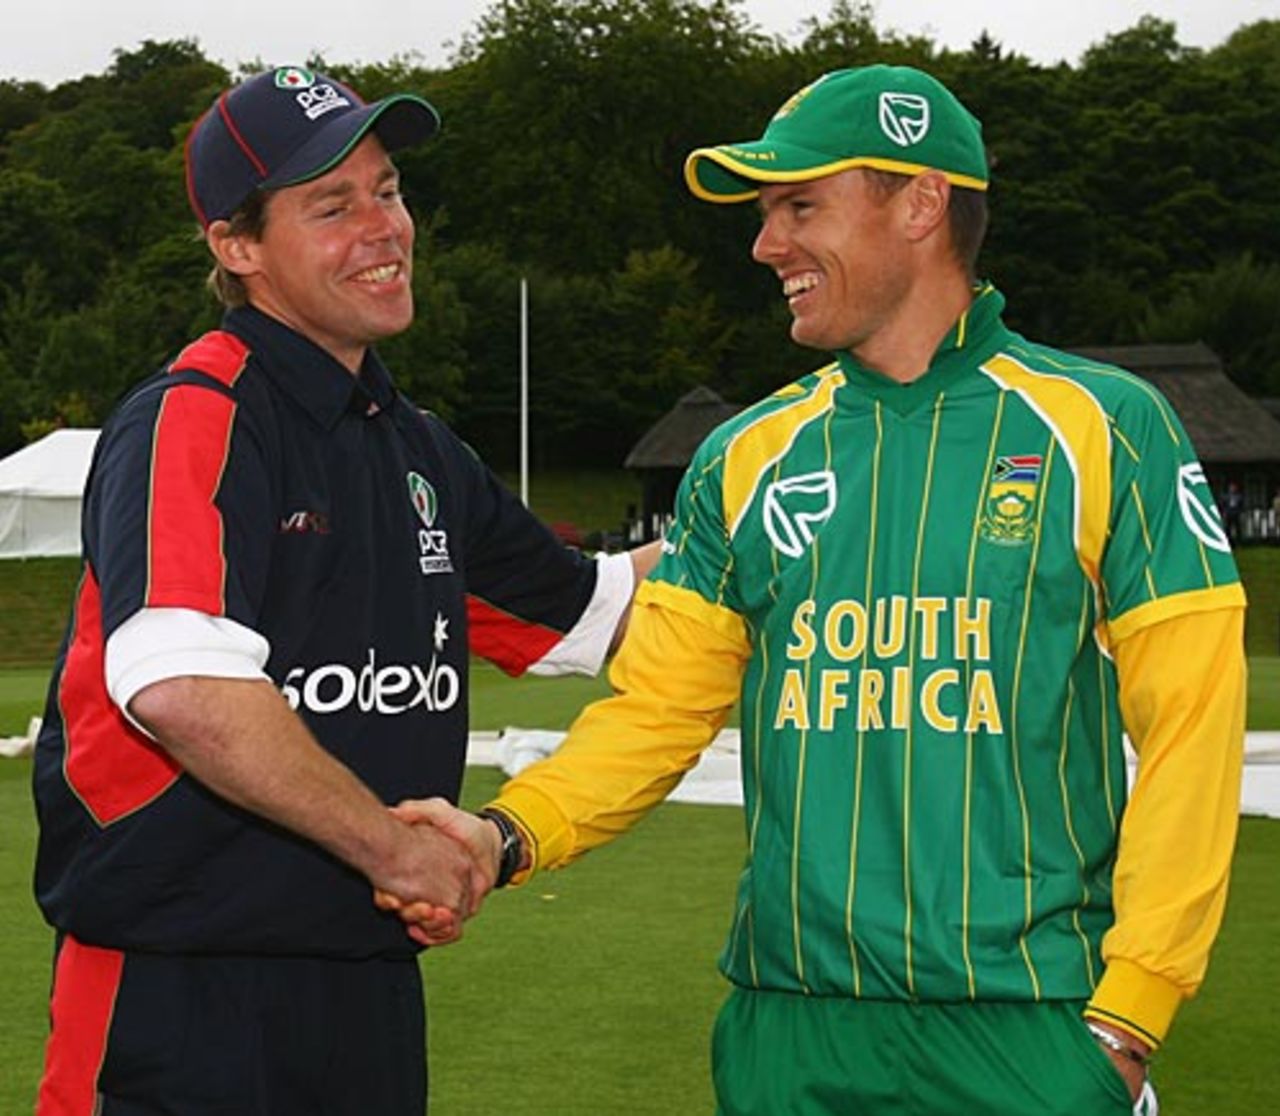 Nick Knight shakes hands with Johan Botha, PCA Masters XI v South Africans, Wormsley, August 13, 2008